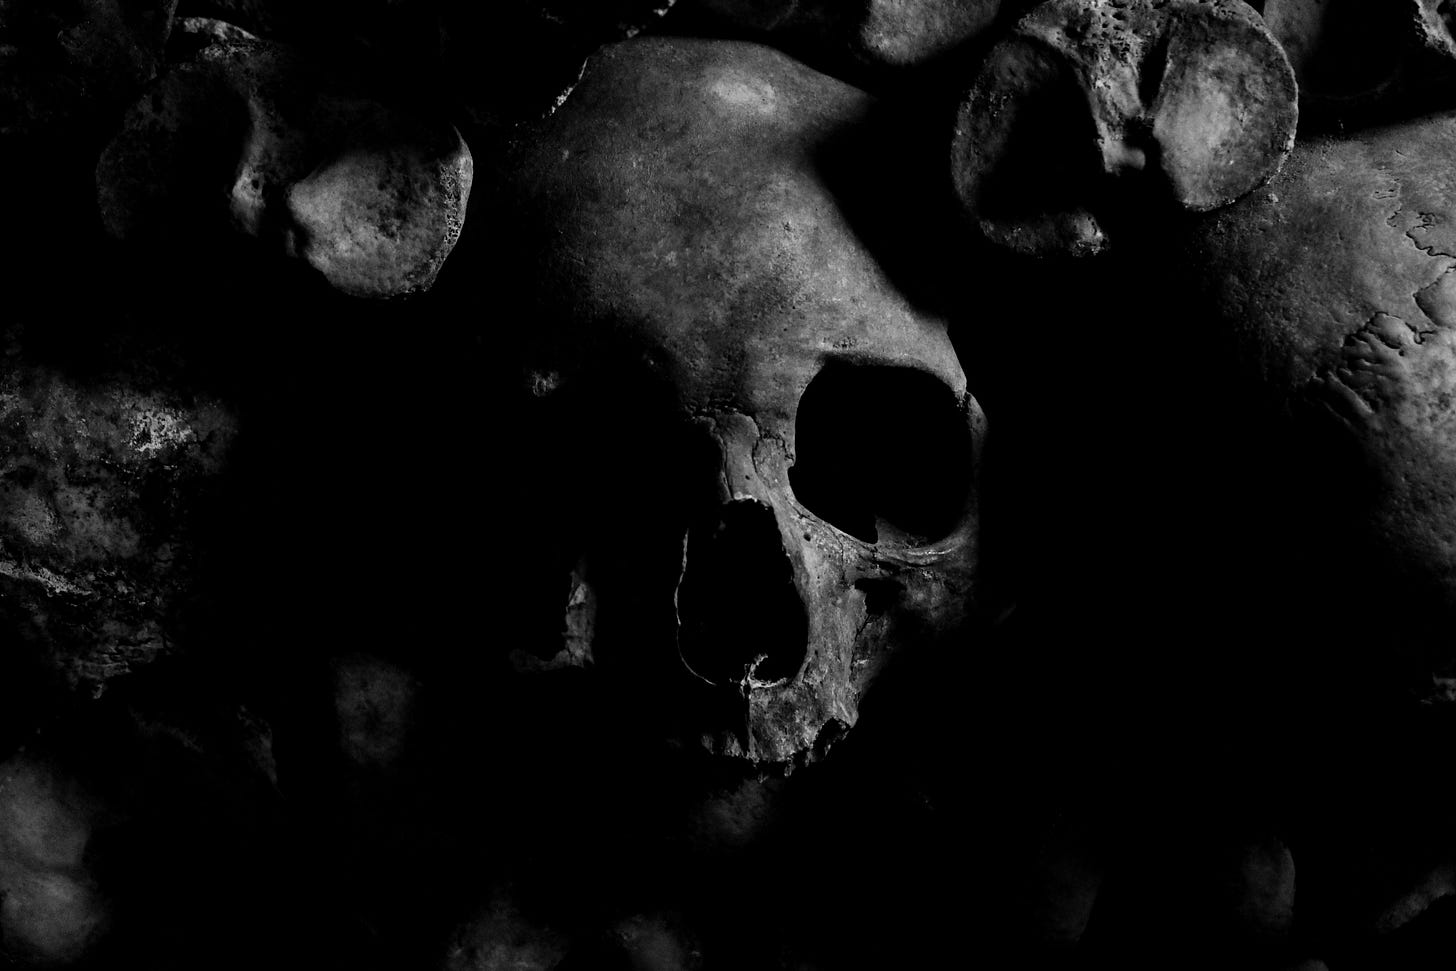 a dark black and white image of a skull and bones on the ground